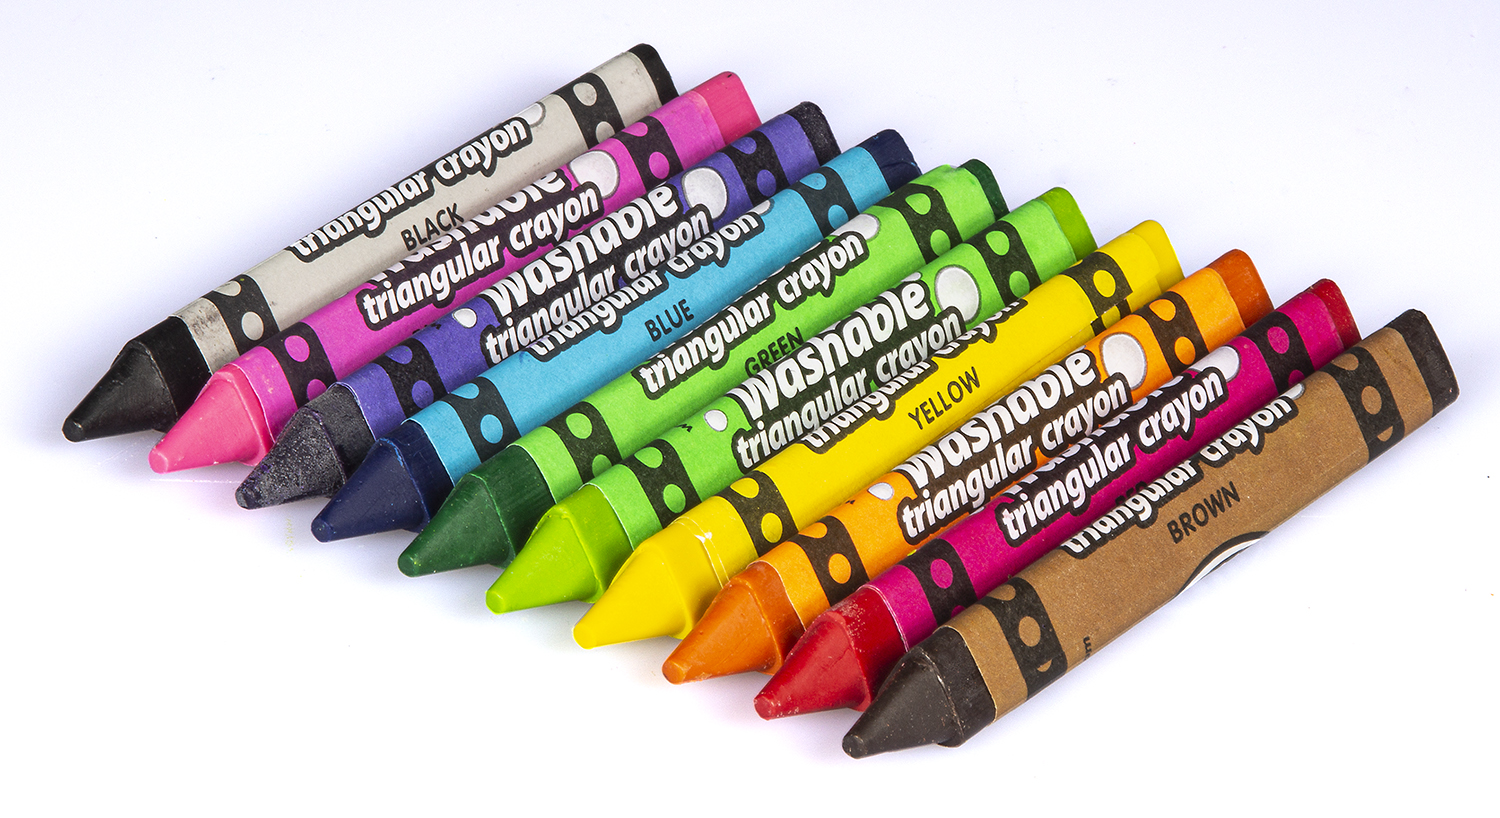 Cra-Z-Art Jumbo Washable Triangular Crayons, 10 Count, Assorted Colors, Back to School Supplies - image 4 of 9